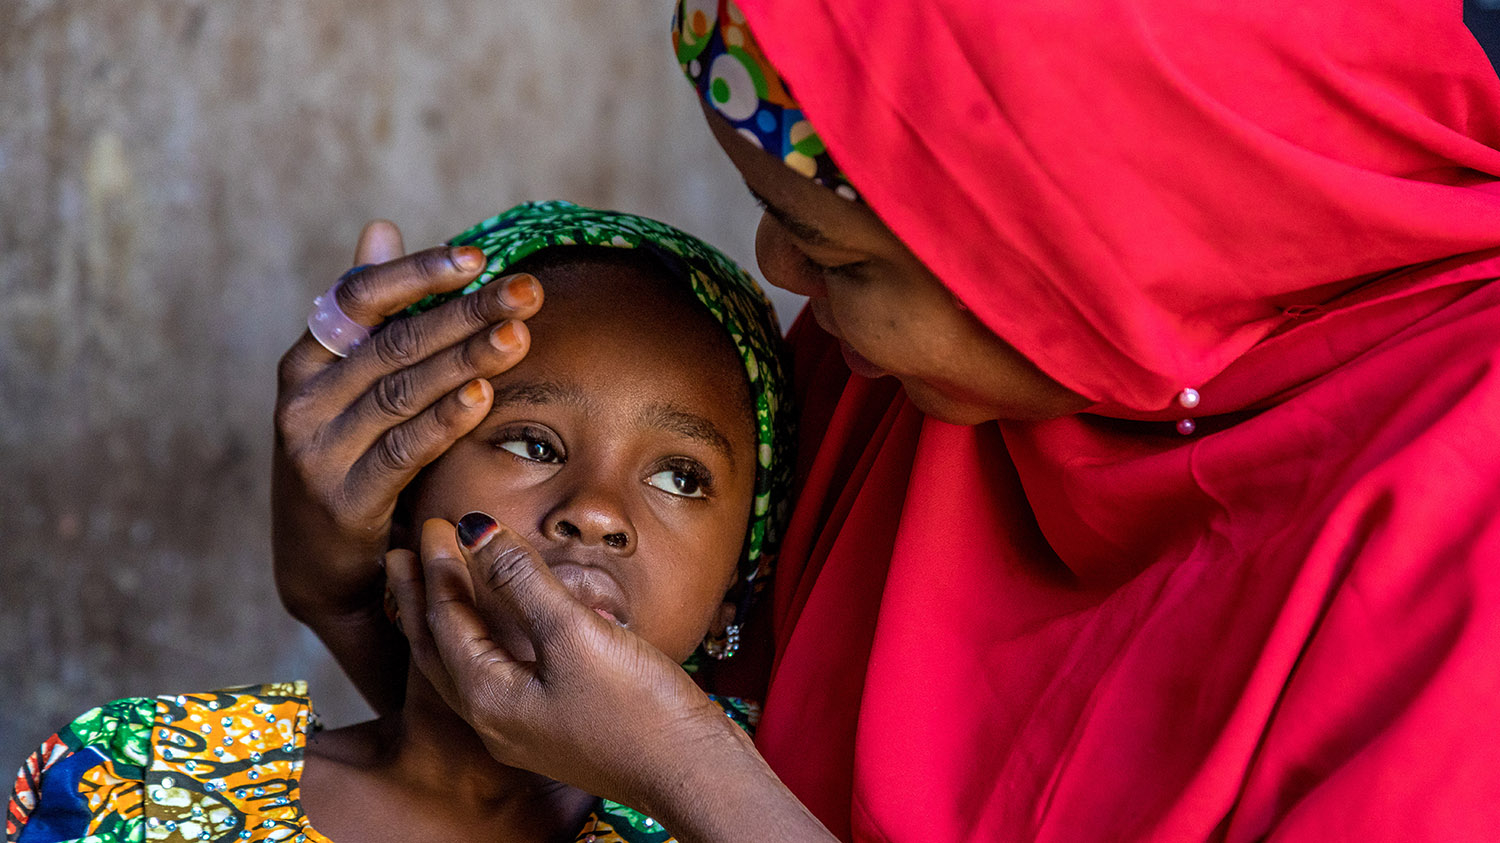 A young girl with cataracts is comforted by her mother.